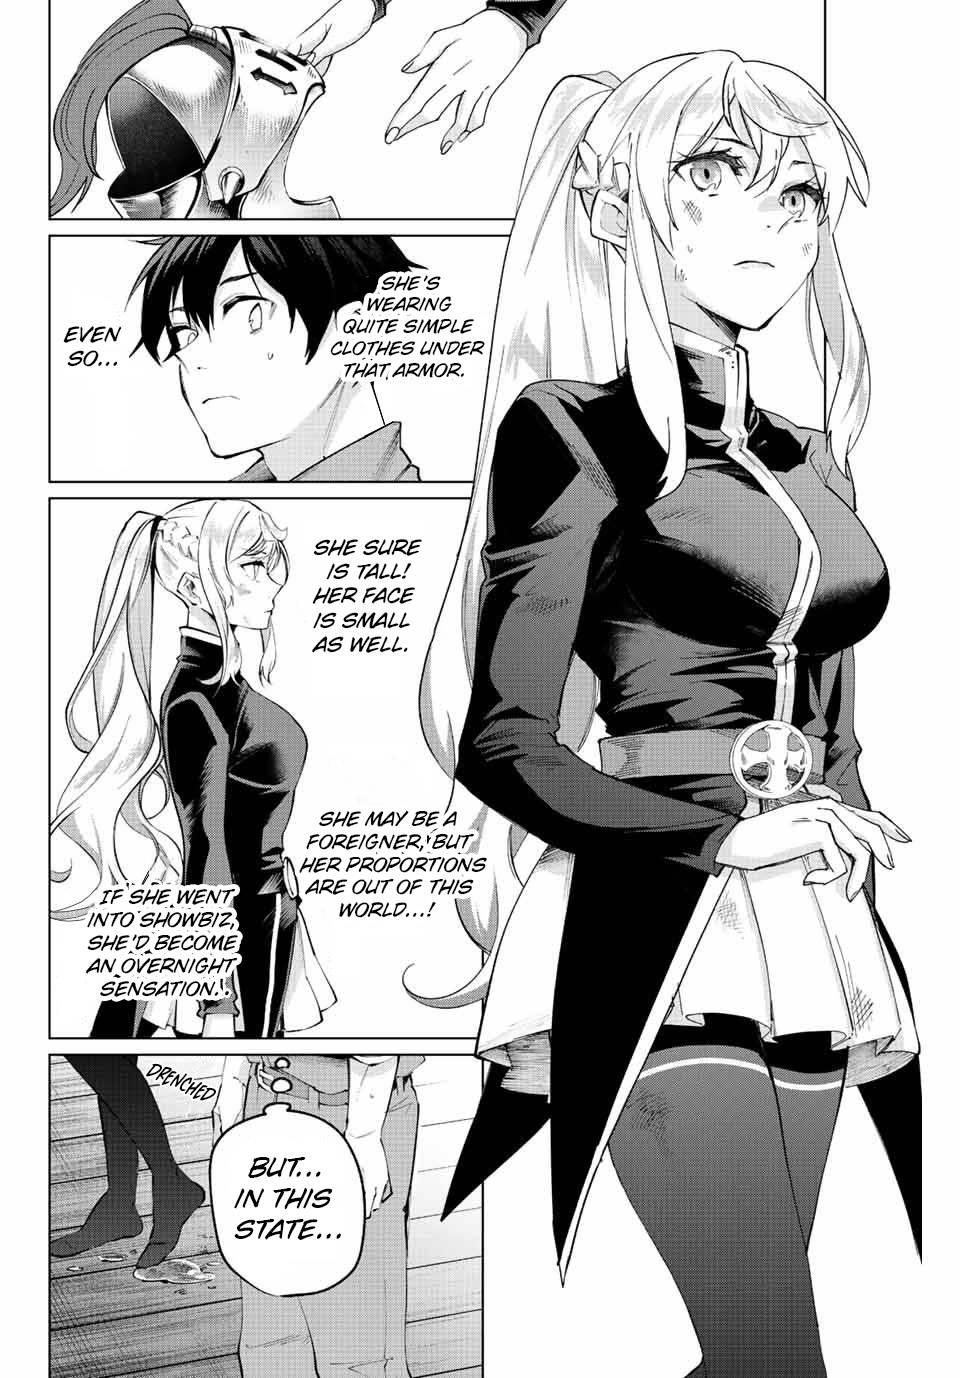 DISC] I Found a Female Knight in a Rice Field, in the Countryside They  Think She's My Wife - Chapter 1 : r/manga